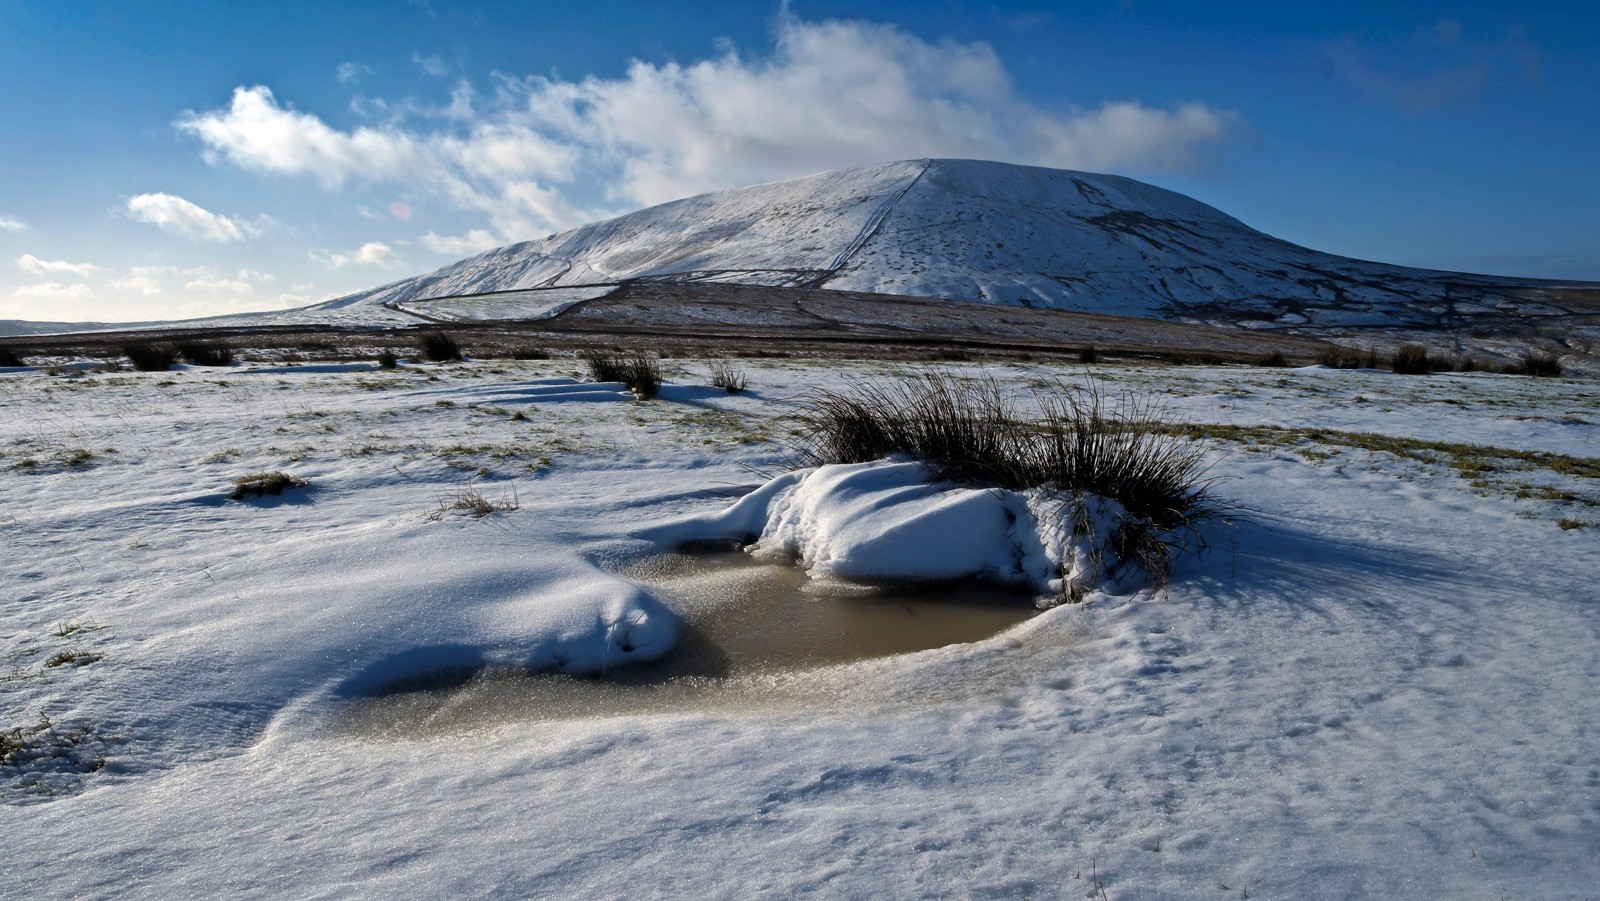 7.Pendle Hill in winter